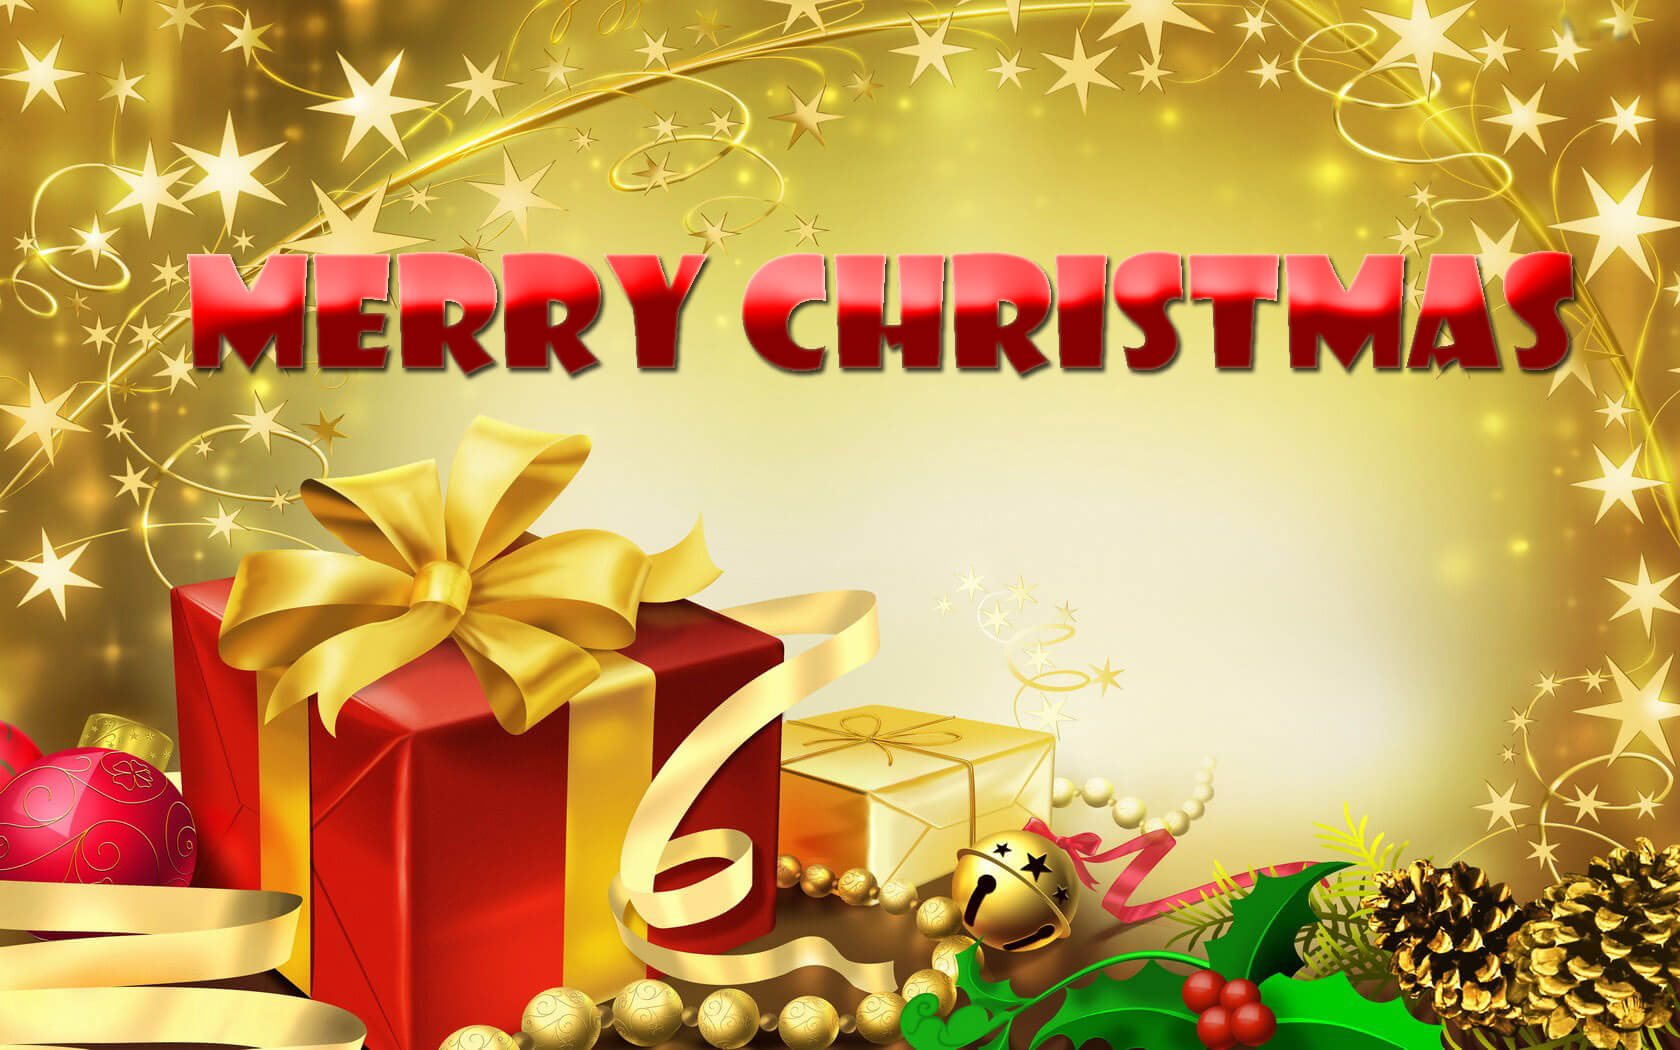 Best 70 Happy Merry Christmas Wallpapers HD 2019   Events Yard